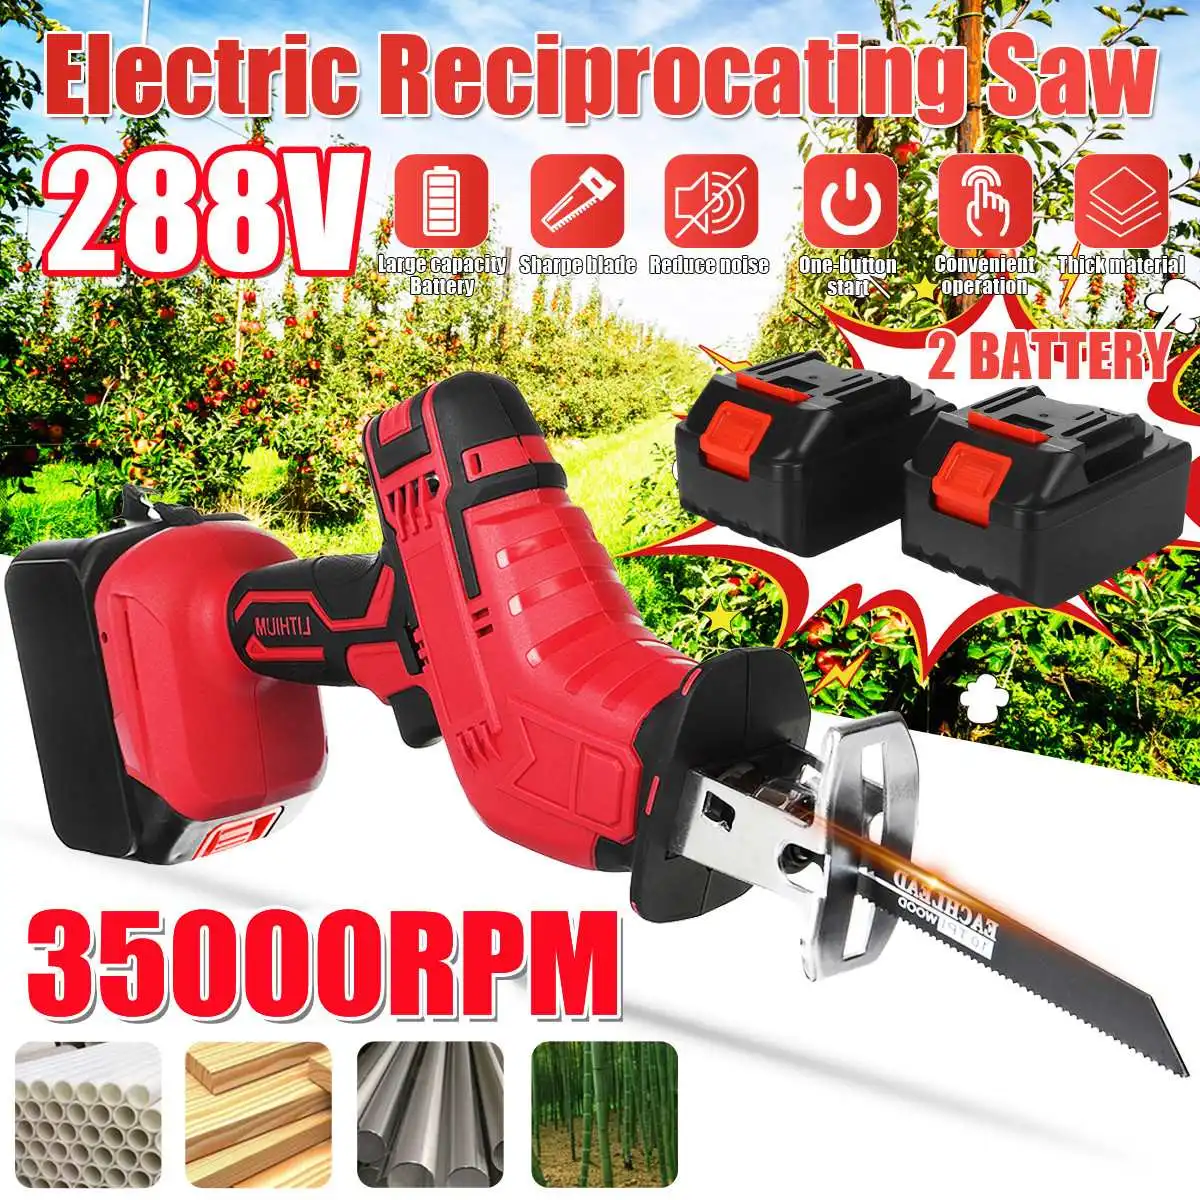 

288V 35000RPM Cordless Reciprocating Saw Electric Saw with 4 Blades Wood Metal Chain Saws Cutting Power Tool 1/2 Battery